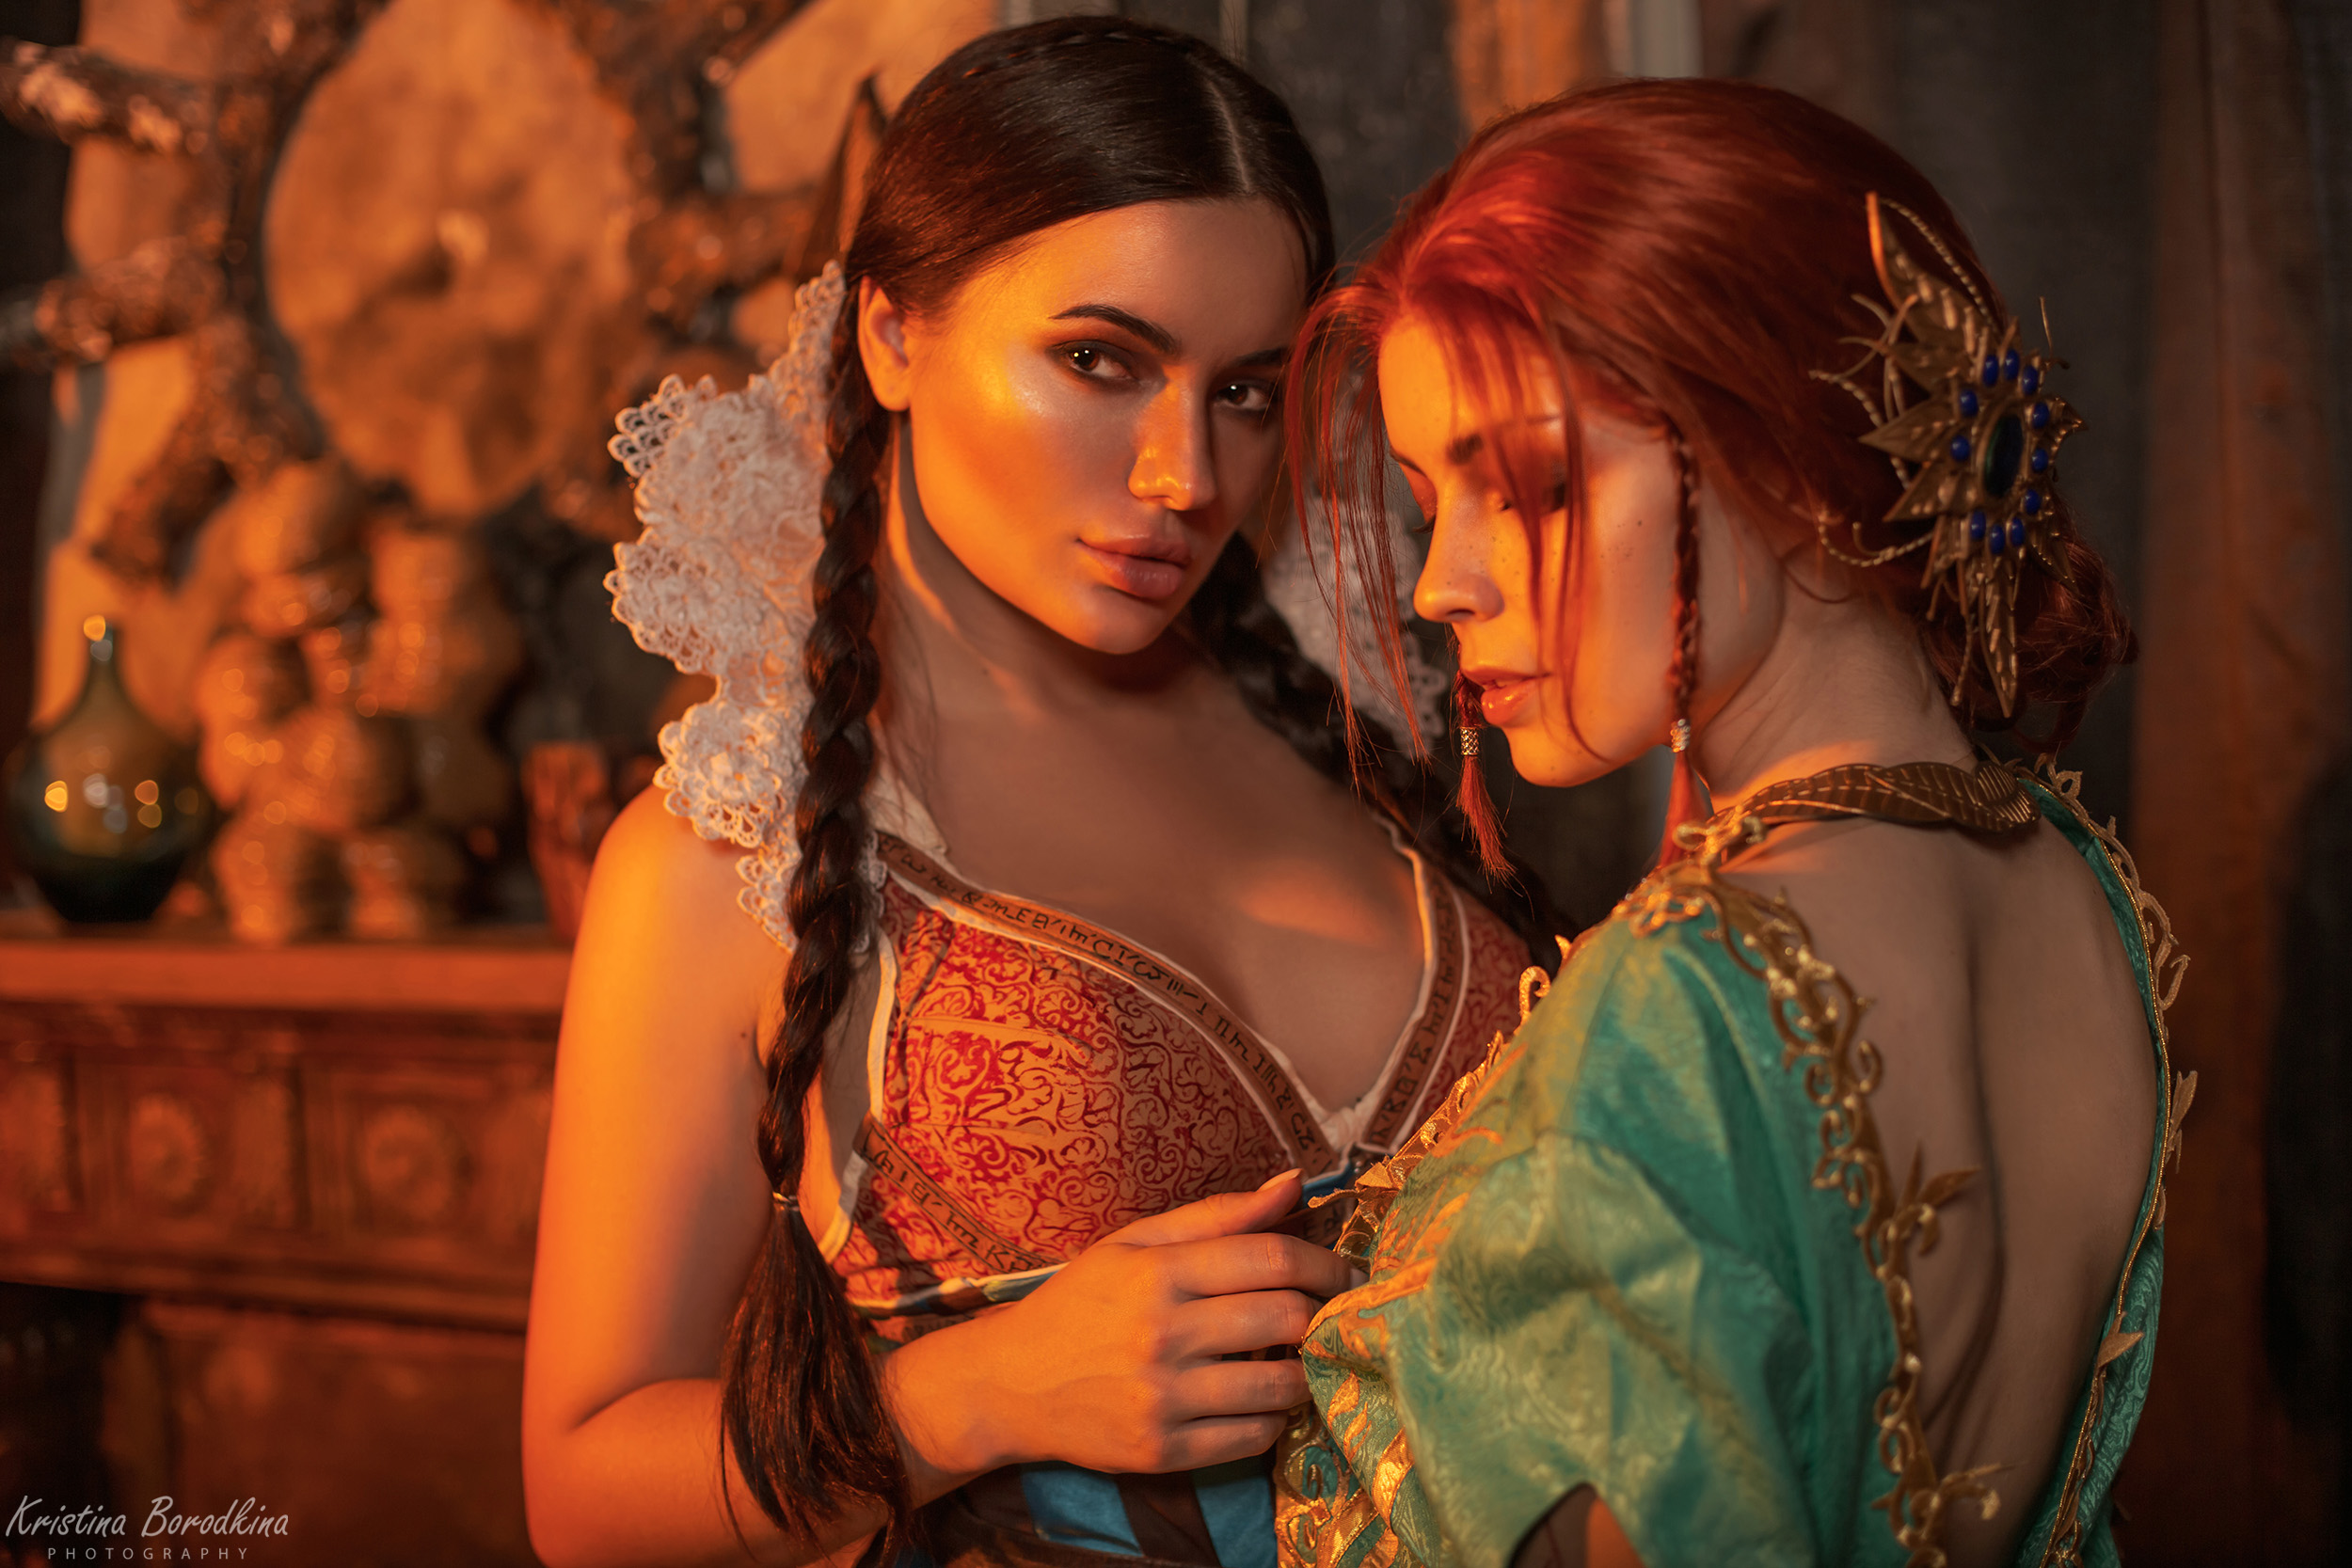 Triss Merigold The Witcher The Witcher 3 Wild Hunt Video Games Video Game Characters Women Redhead B 2500x1667